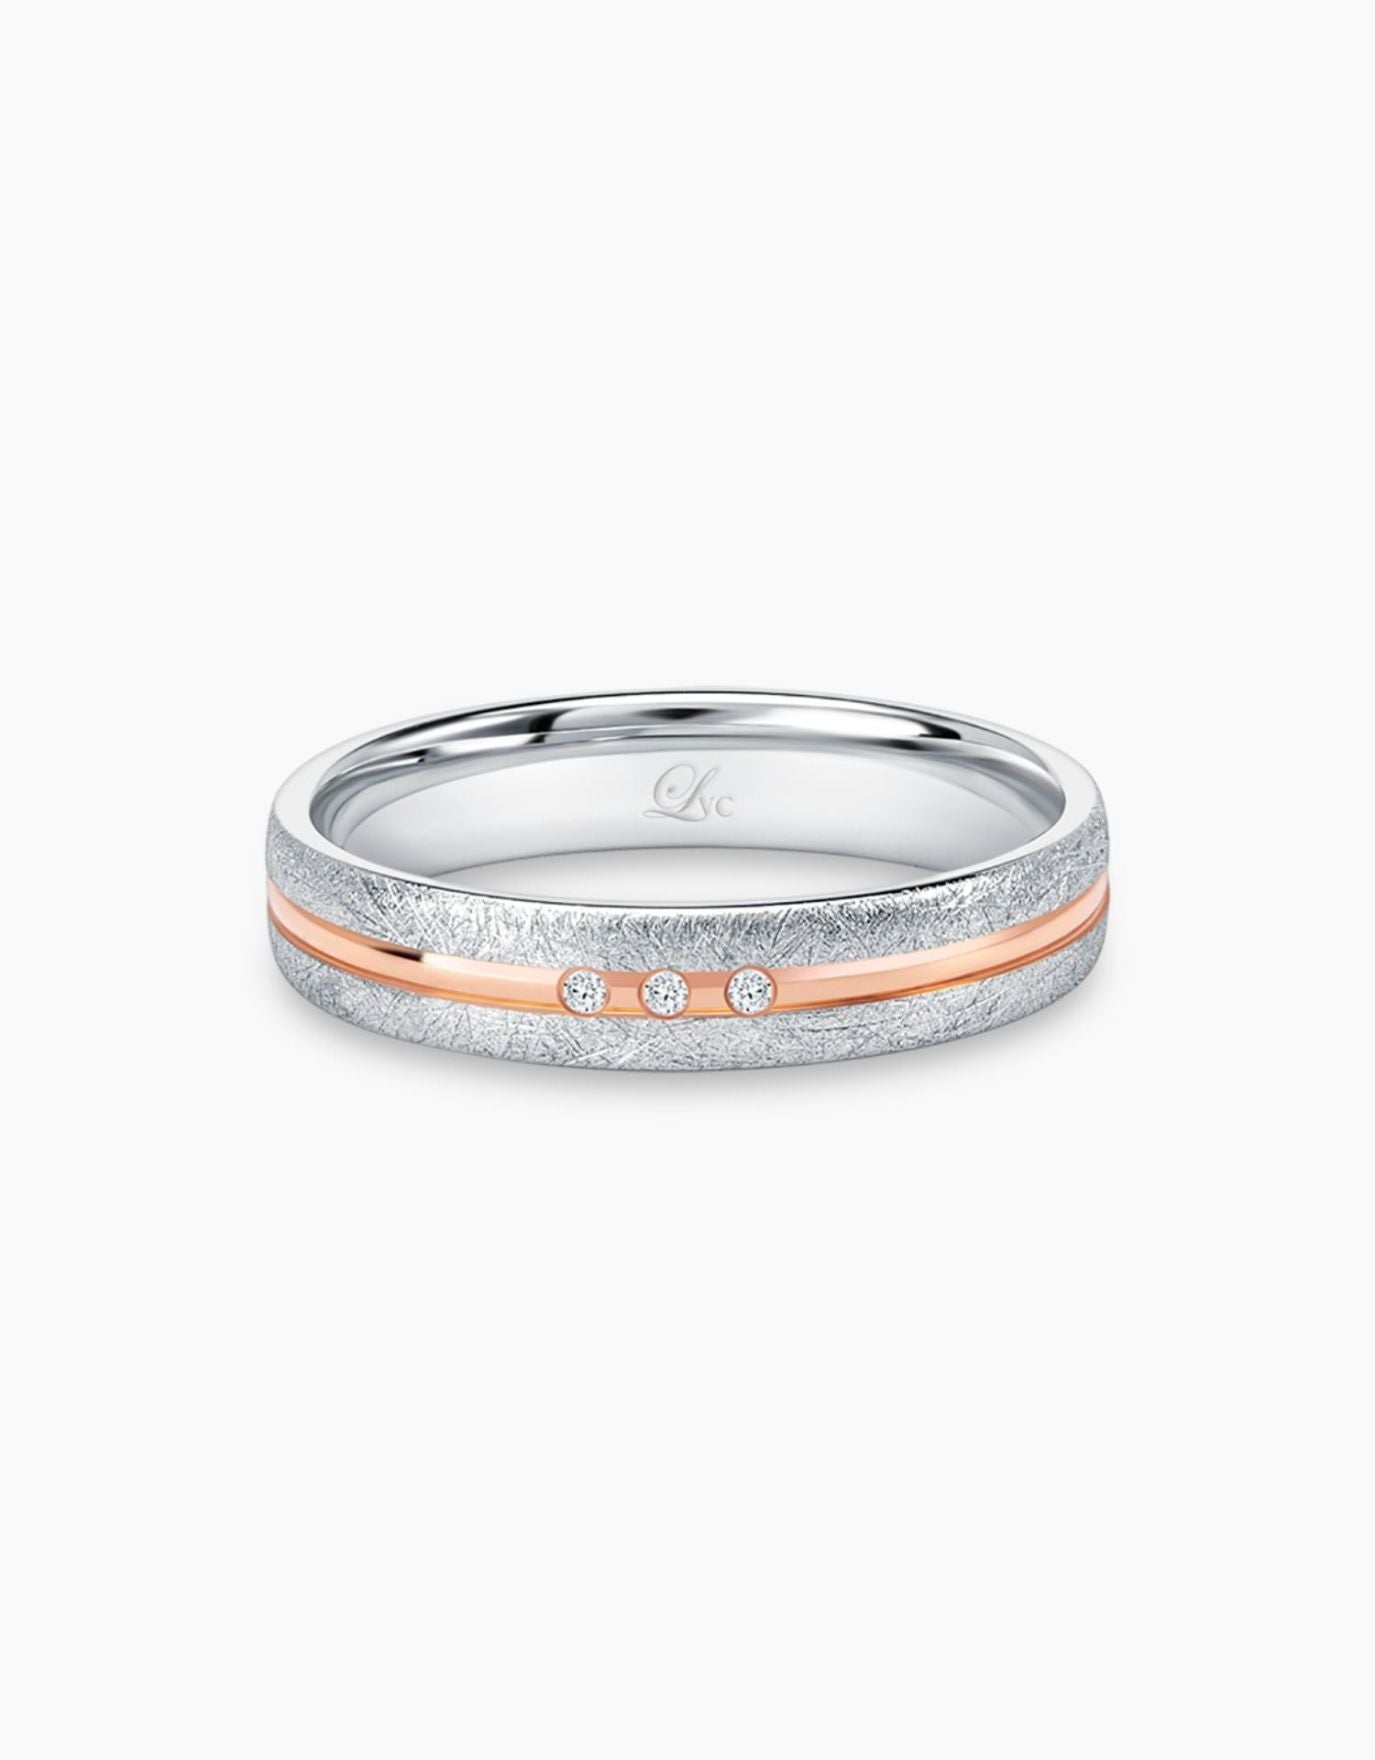 LVC Soleil Wedding Band in Matte and Glossy Finish with a Trio of Diamonds